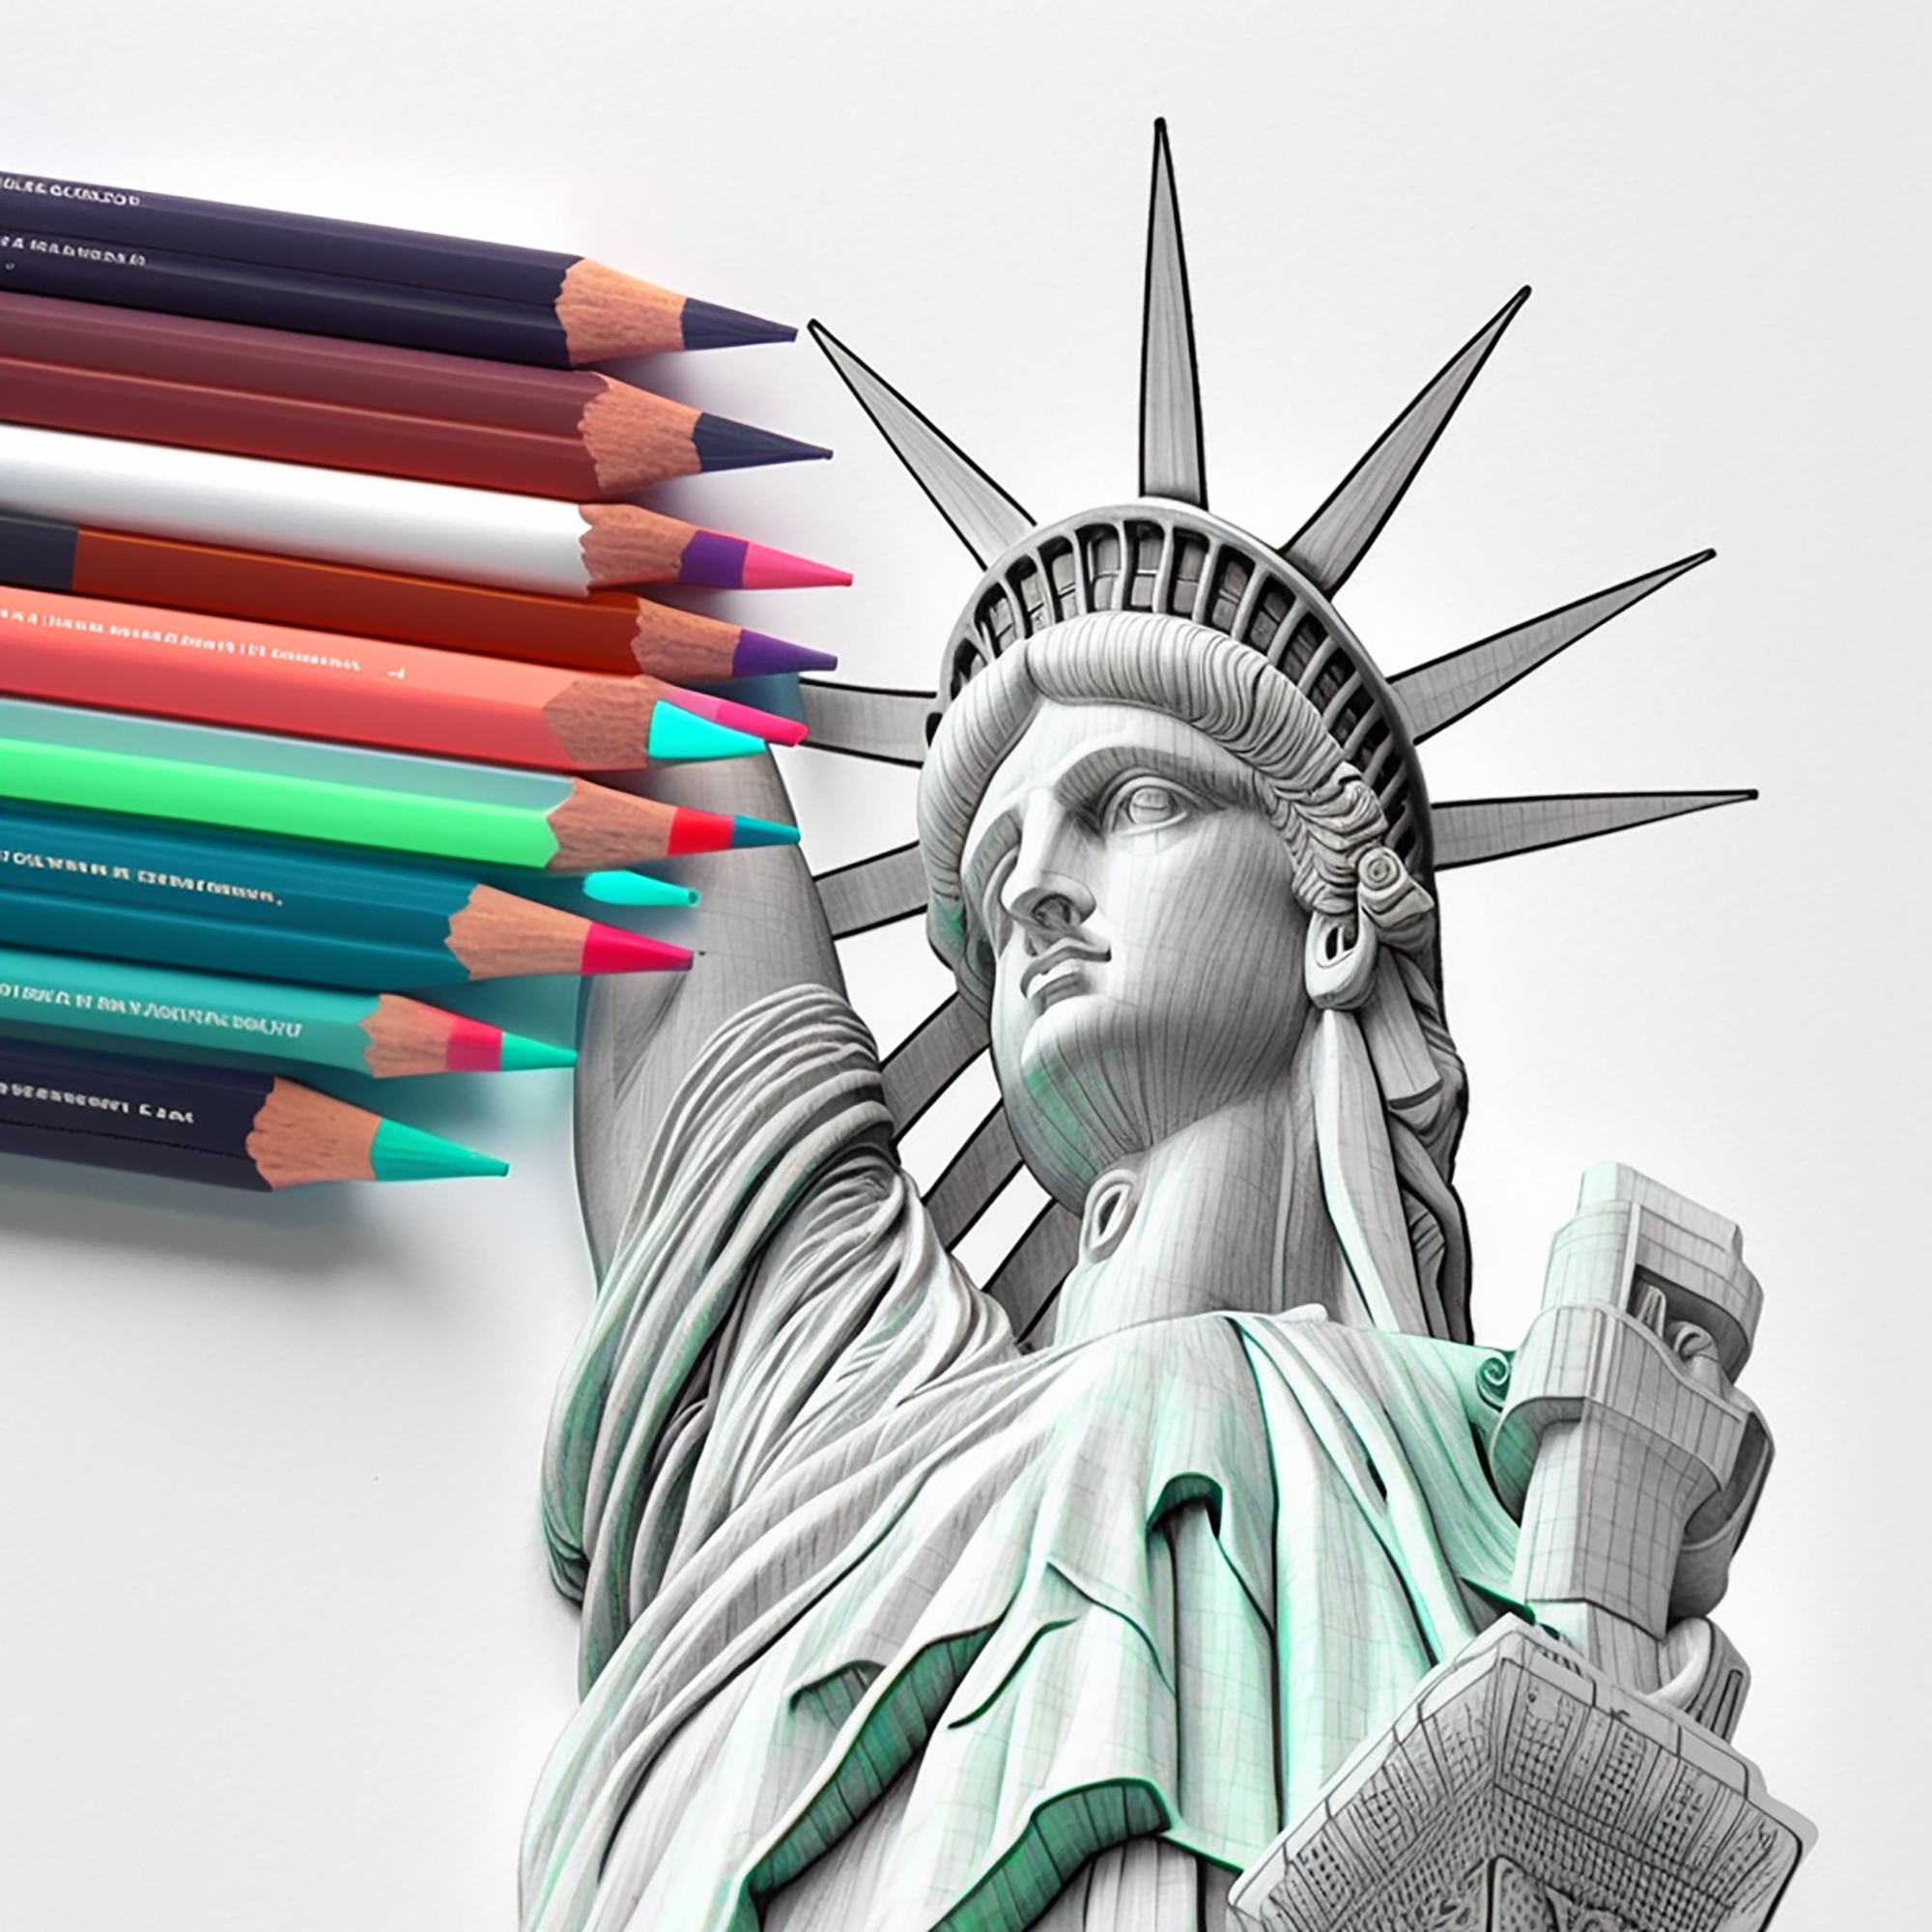 3601-The Statue of Liberty in New York, coloring book